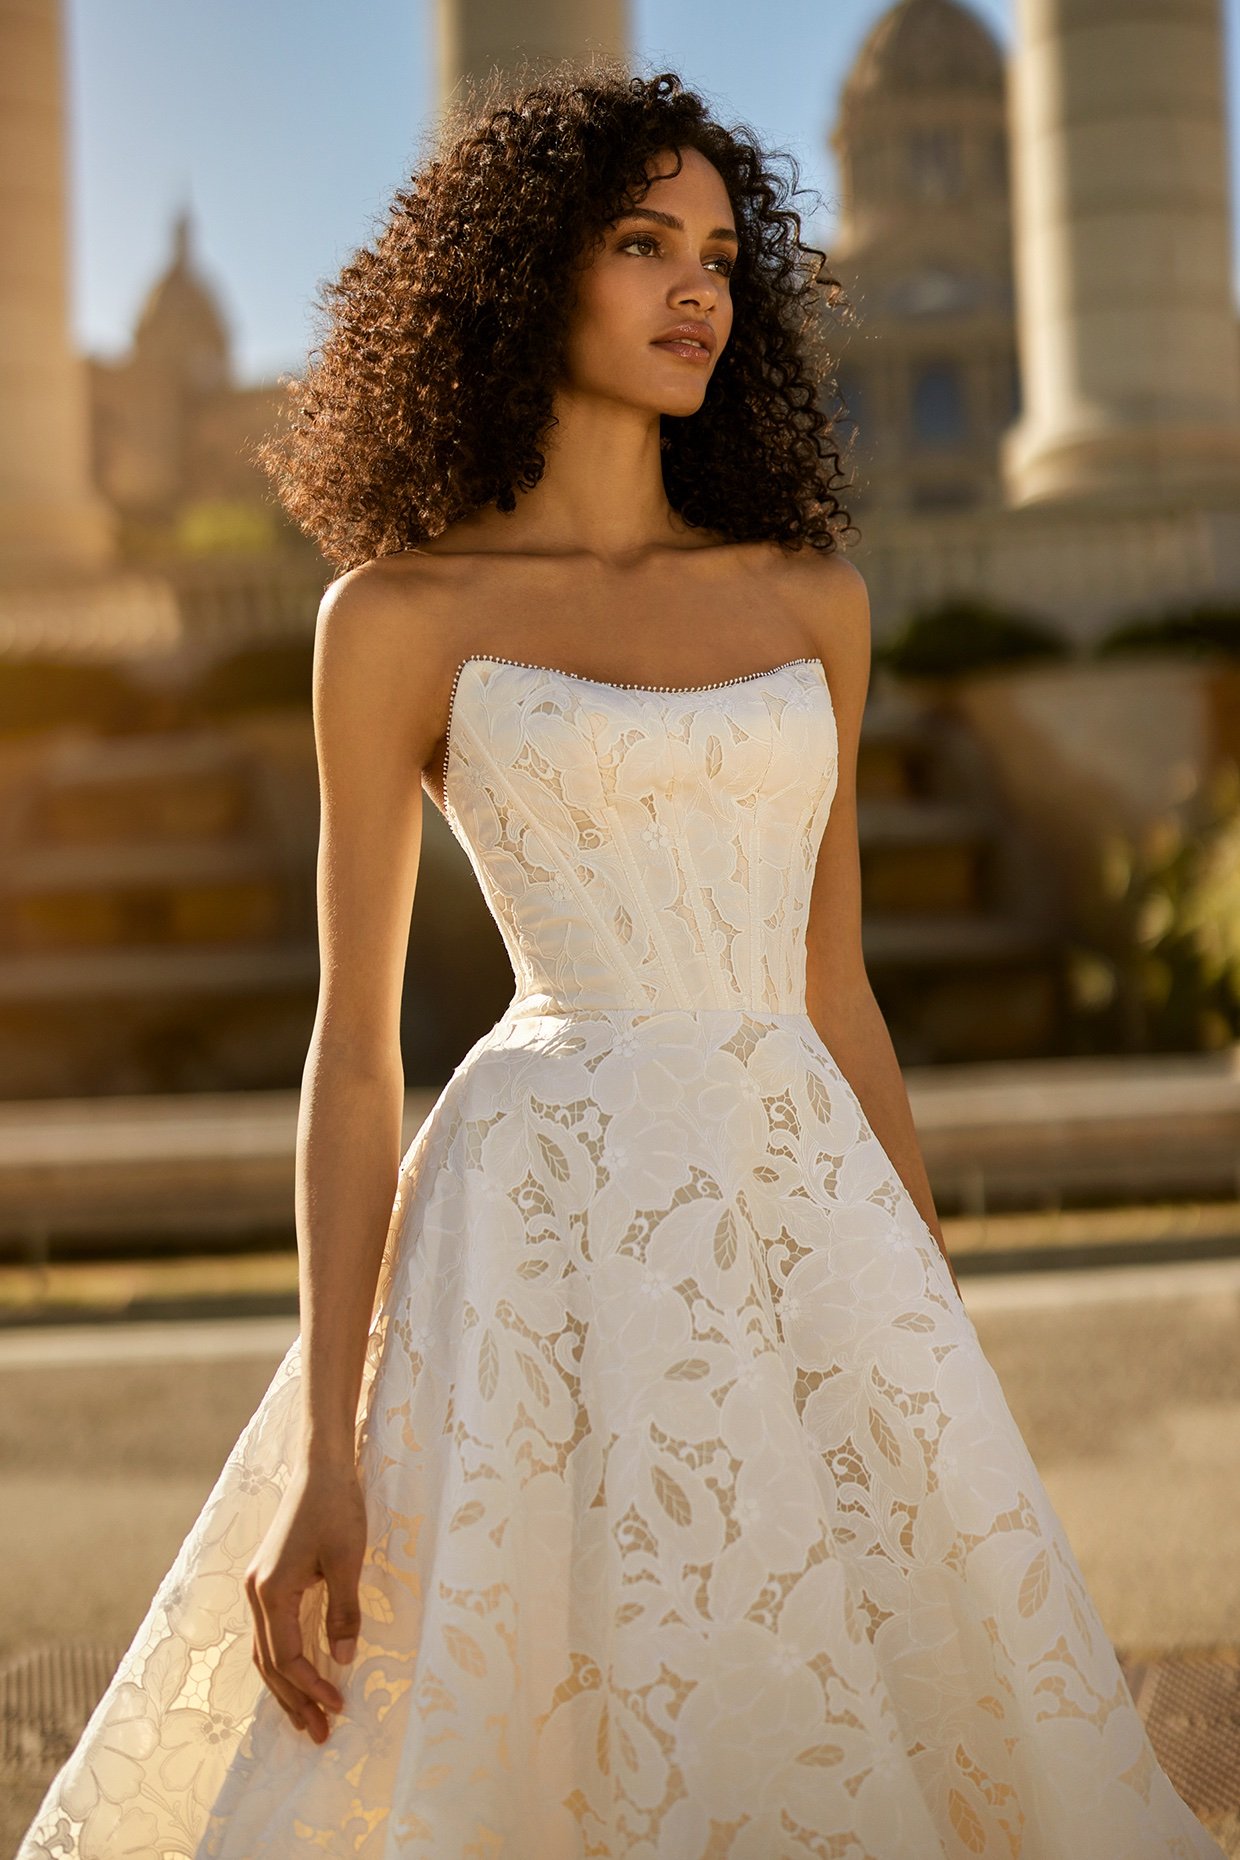 Tulle Ballgown Wedding Dress Featuring a Dreamy Alençon and Chantilly Lace  Bodice